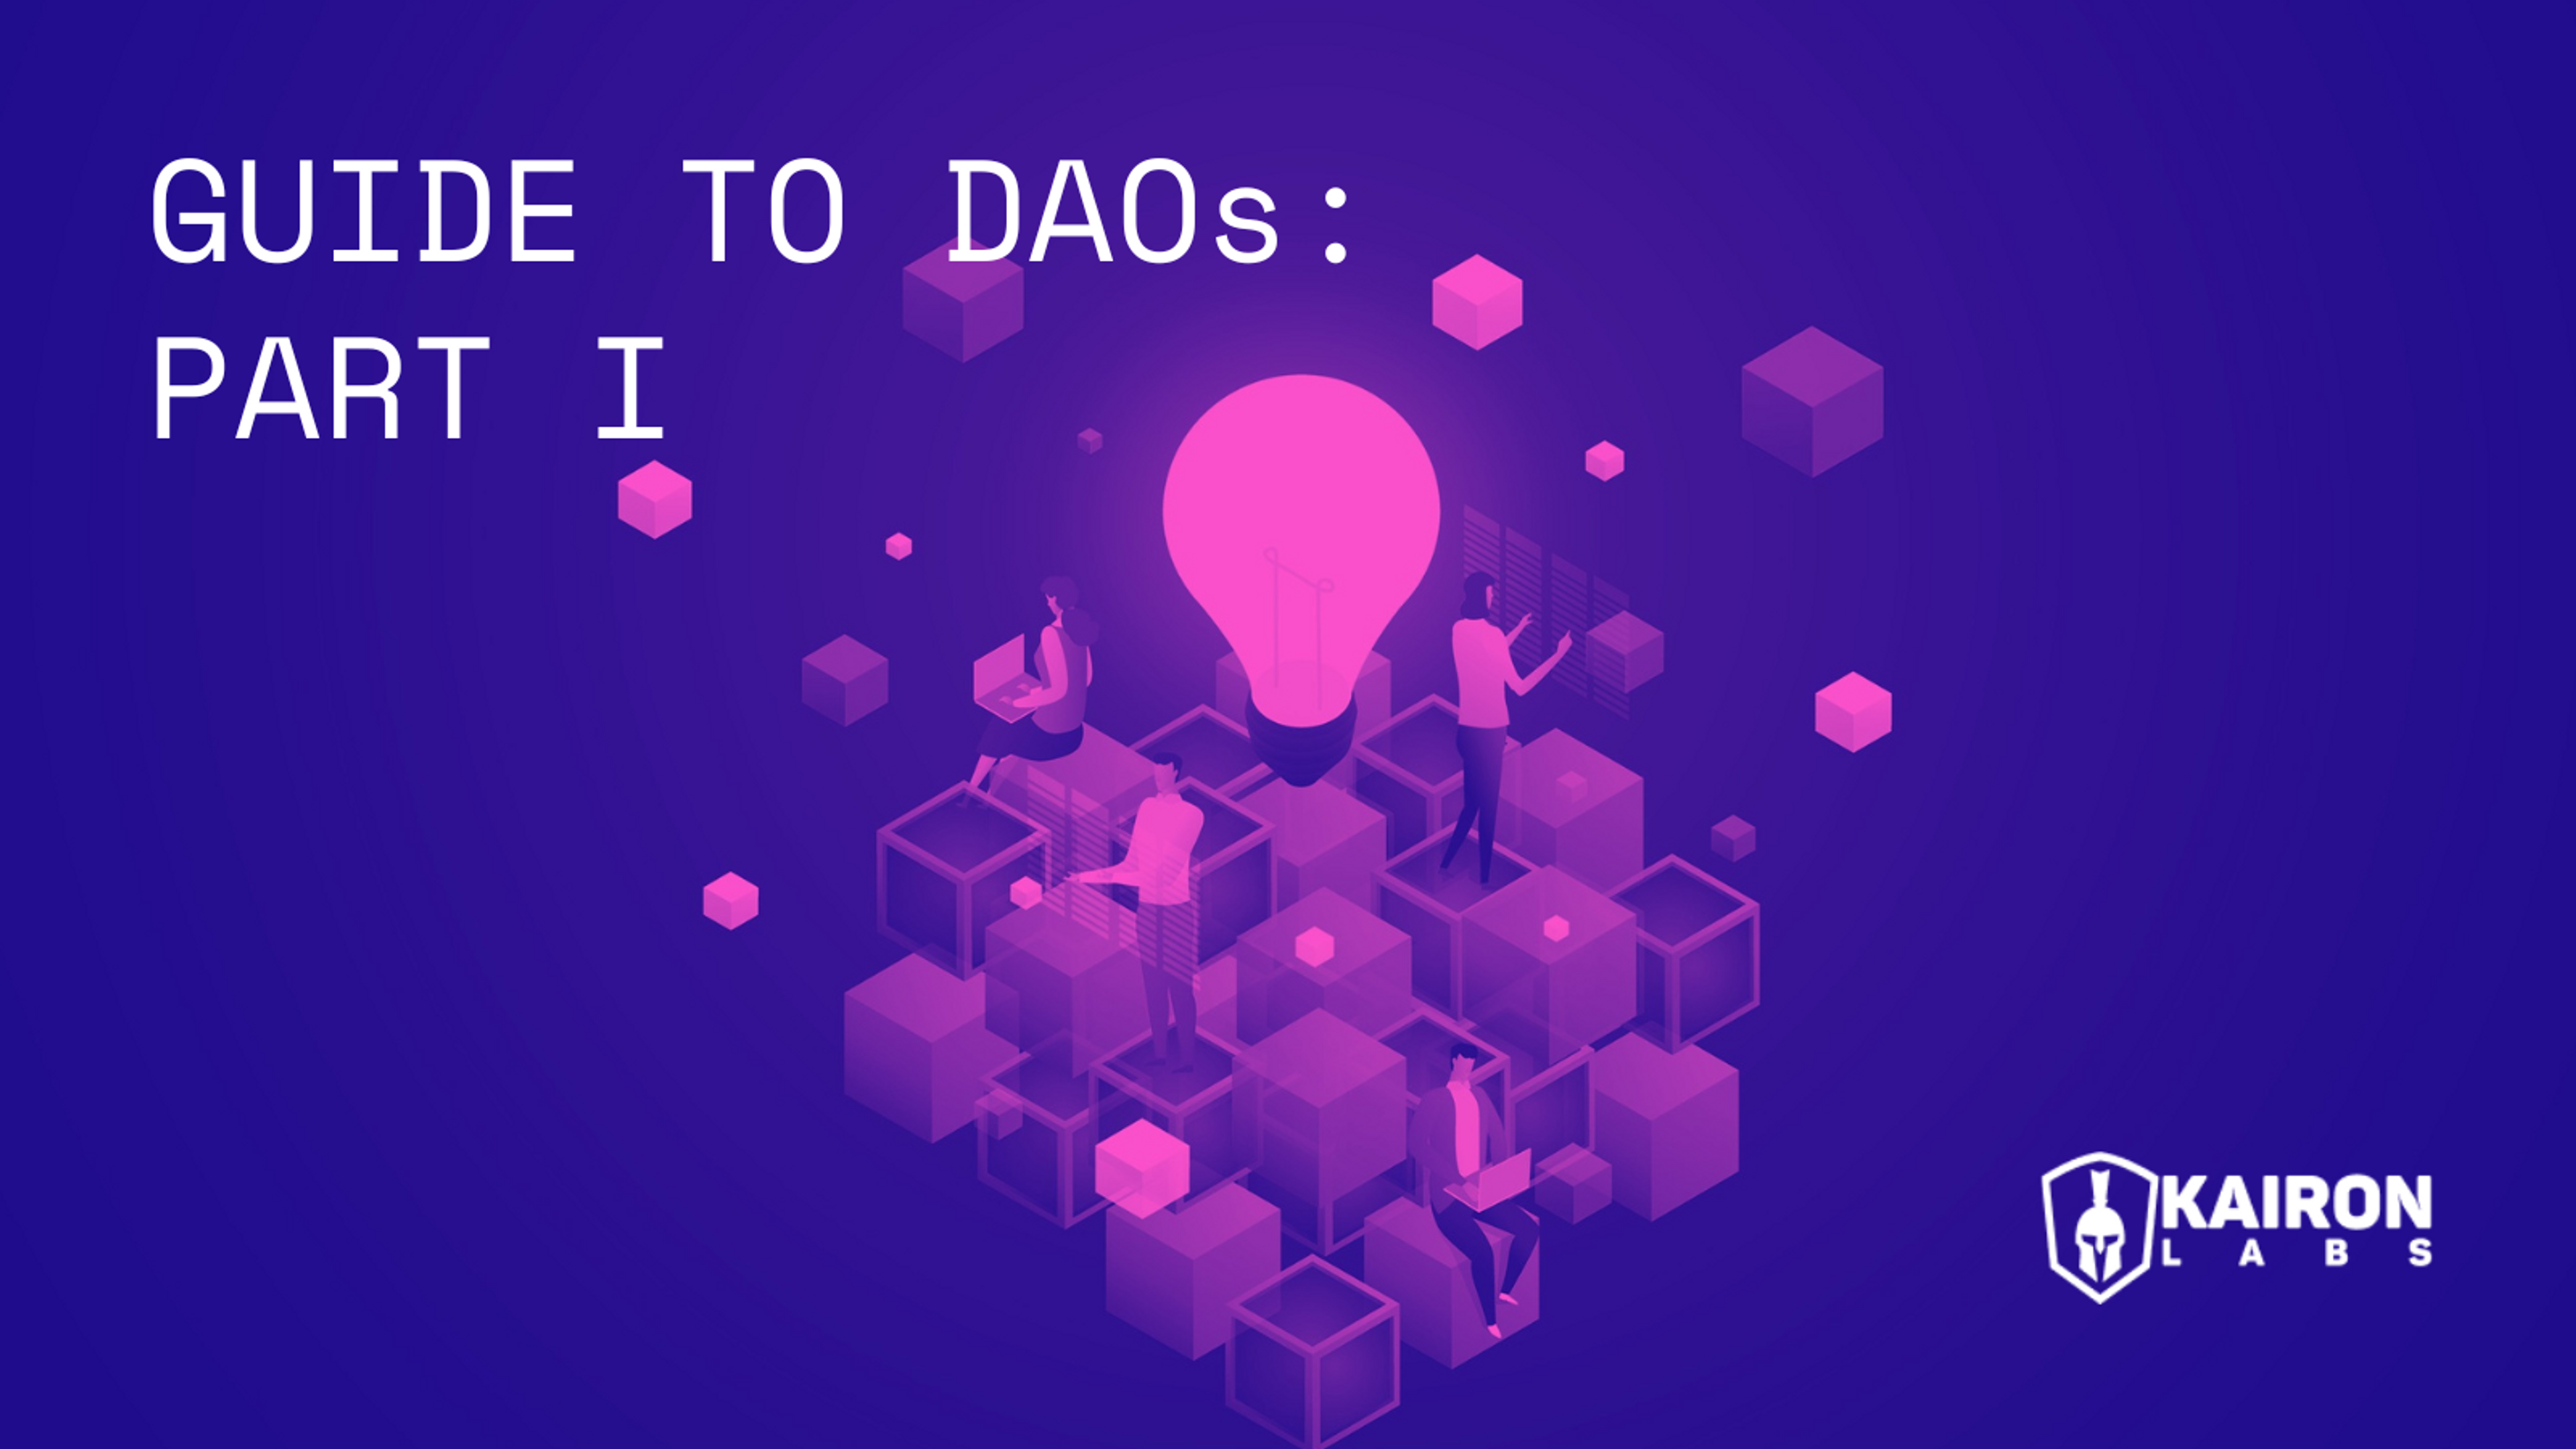 Guide to DAOs_Kairon Labs